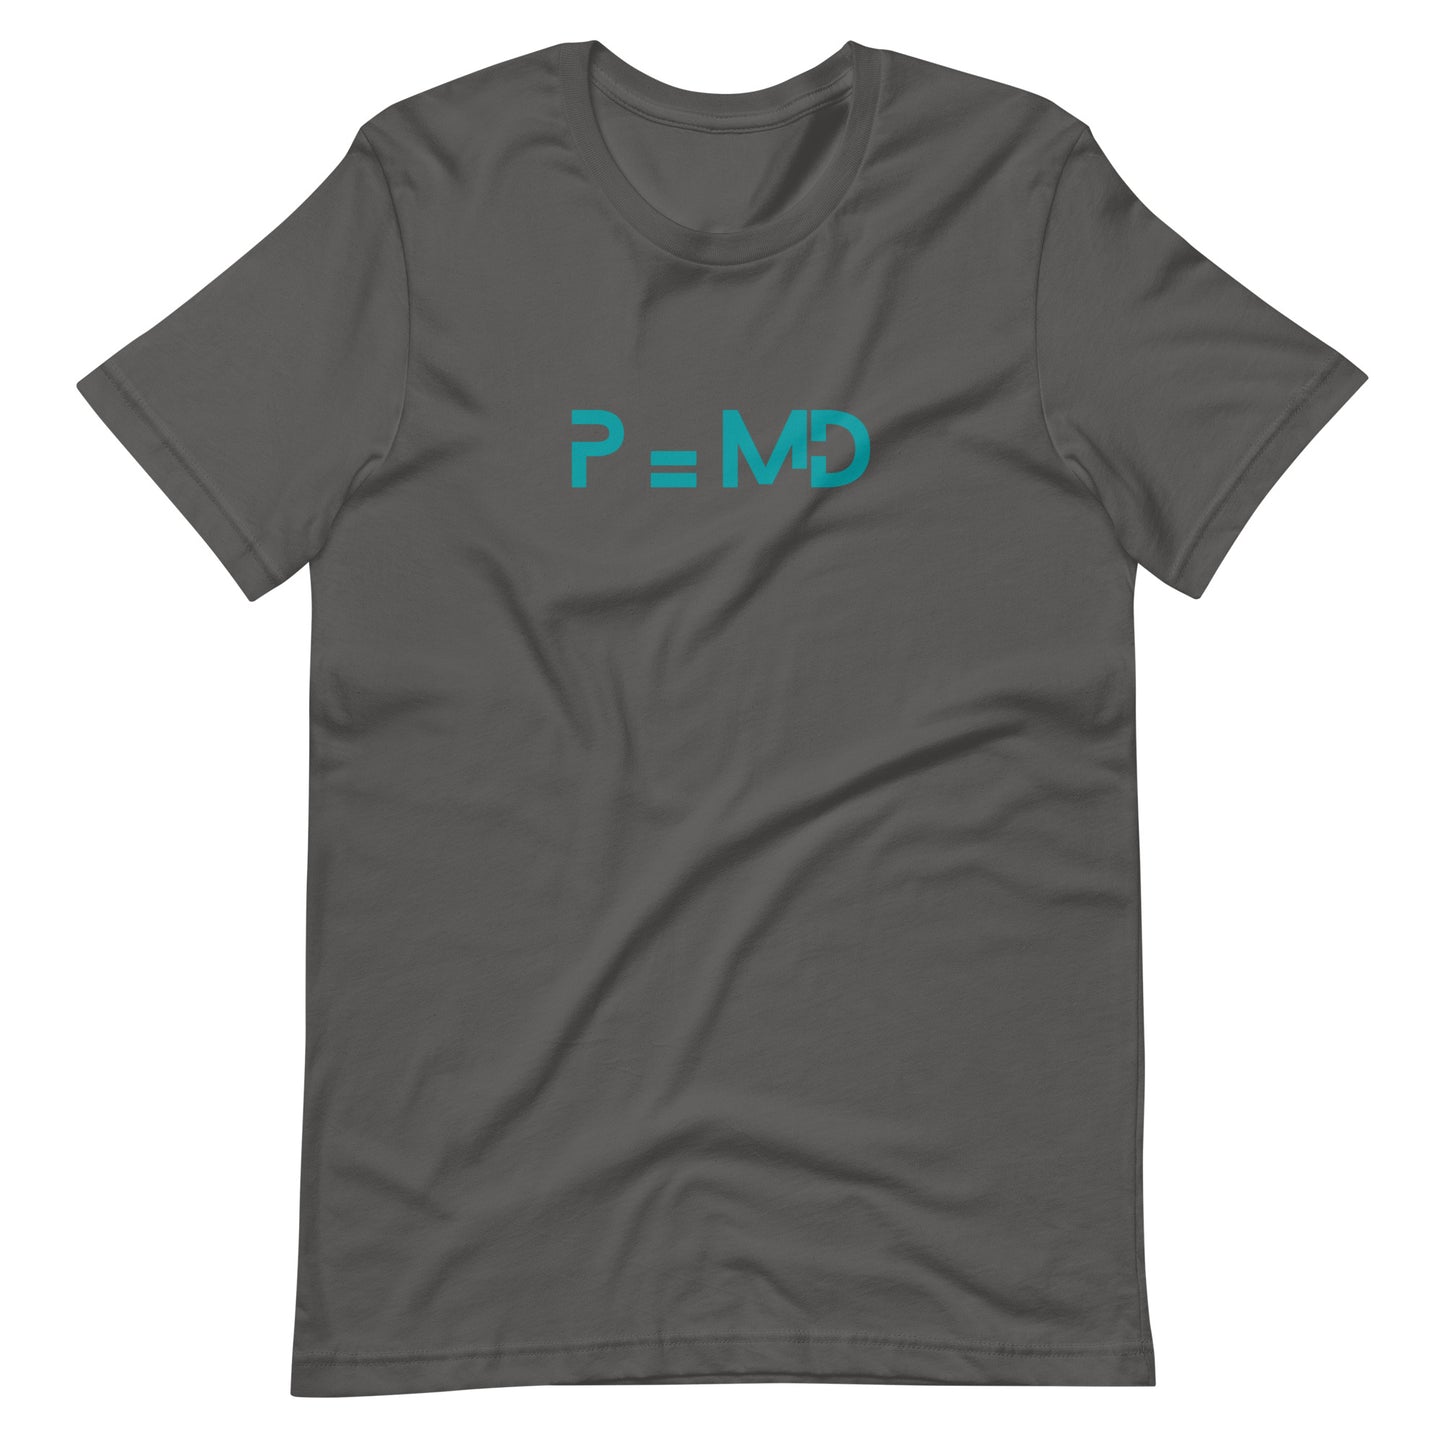 P=MD, Doctor, Physician, Medical Student, Resident, Funny Doctor T-shirt, Medical Shirt